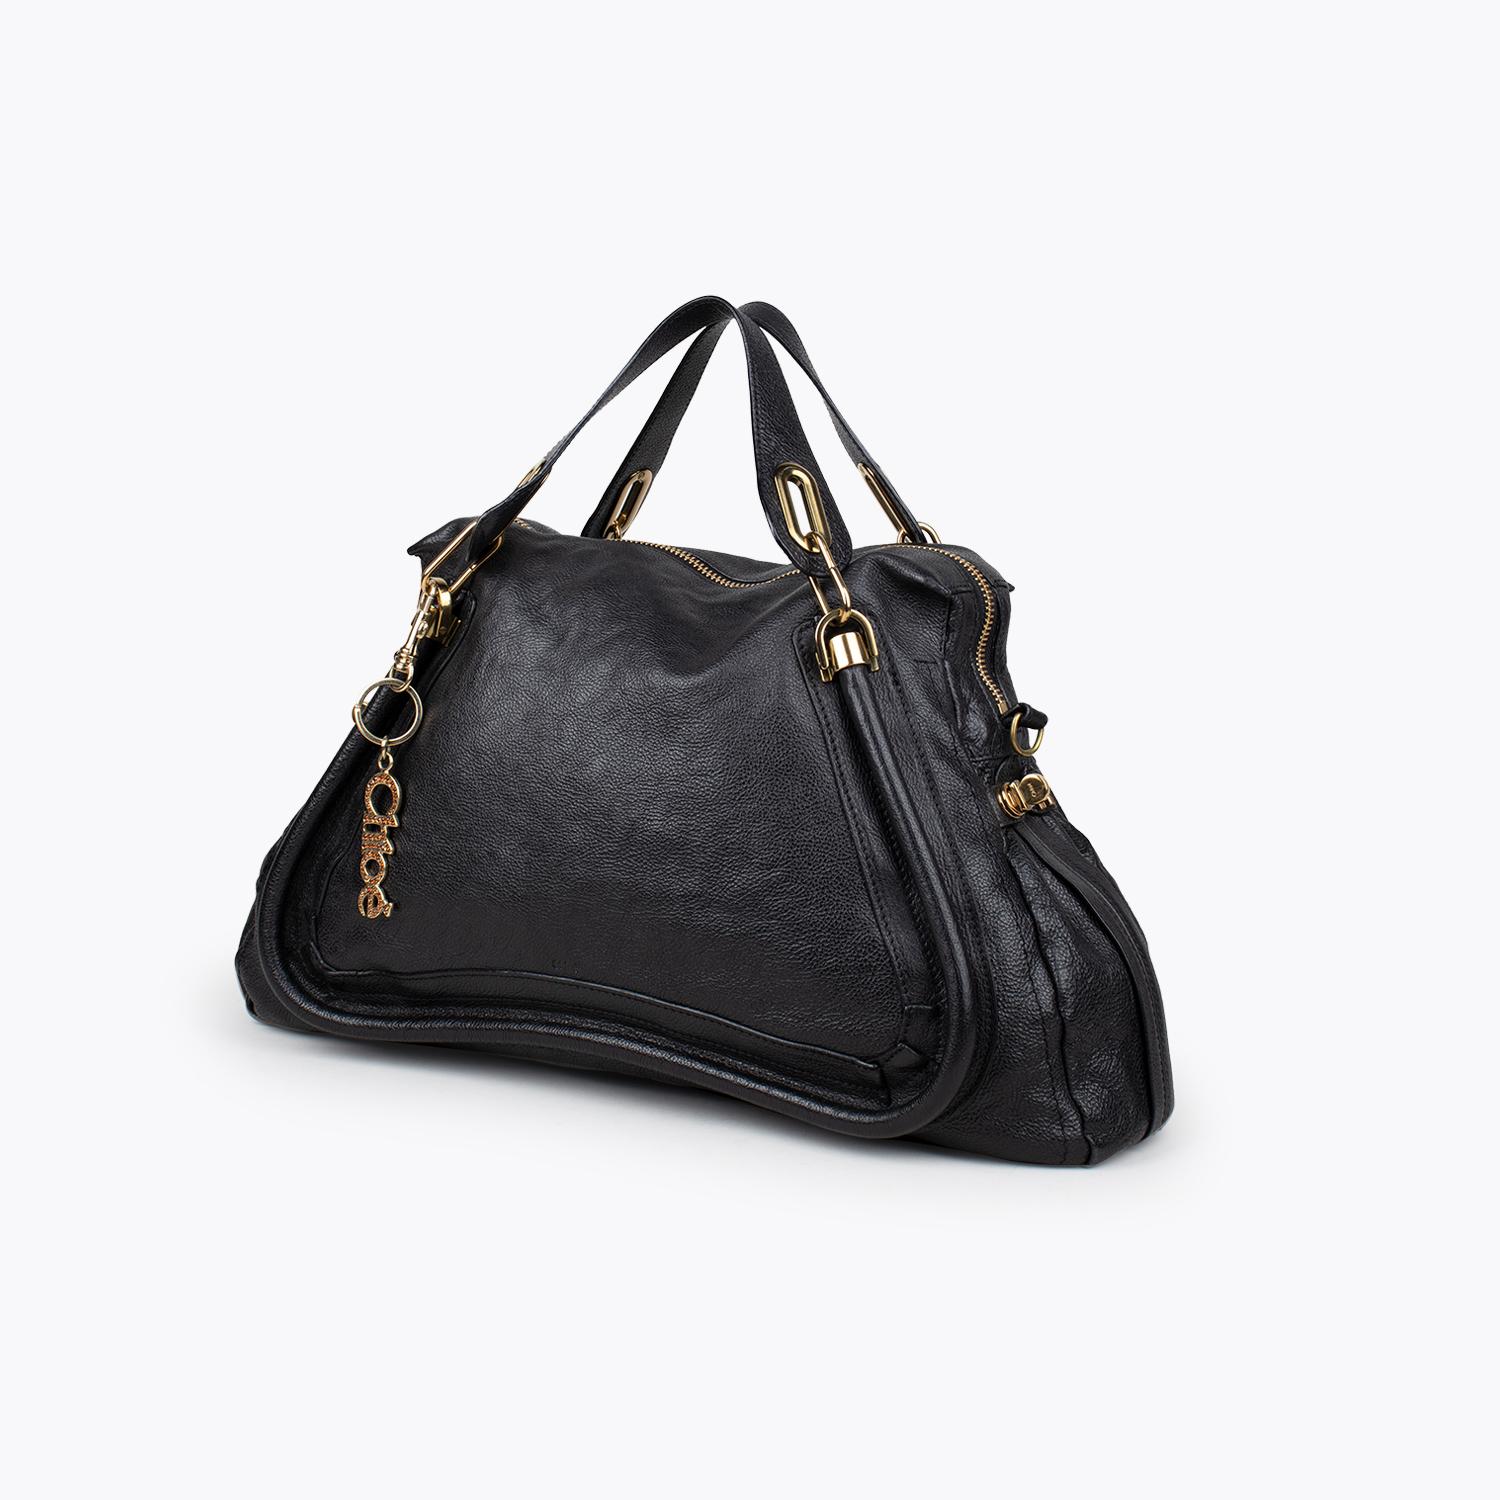 Black grained leather Chloé Large Paraty satchel with

- Gold-tone hardware
- Dual flat top handles
- Single optional rolled shoulder strap
- Tonal woven lining, dual pockets at interior walls; one with zip closure and zip closure at top

Overall